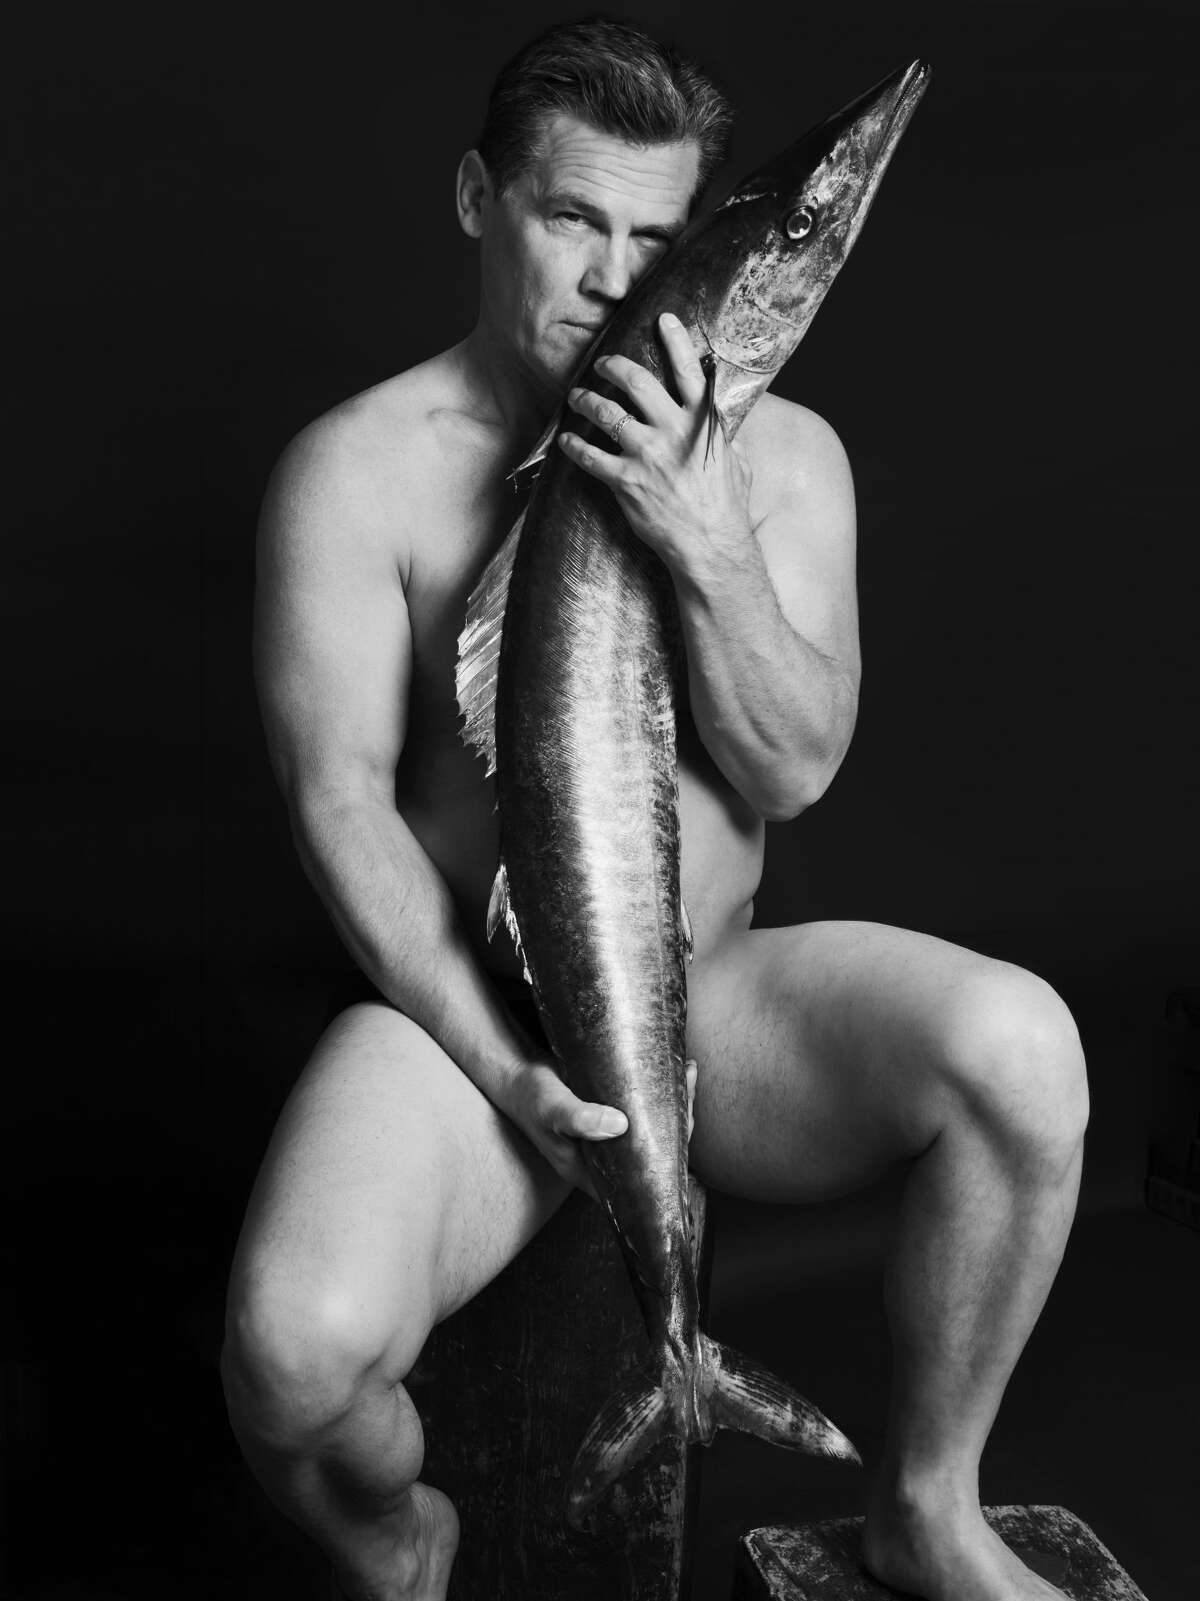 Josh Brolin poses with a wahoo as part of the Fishlove photo campaign to stem overfishing in European waters.